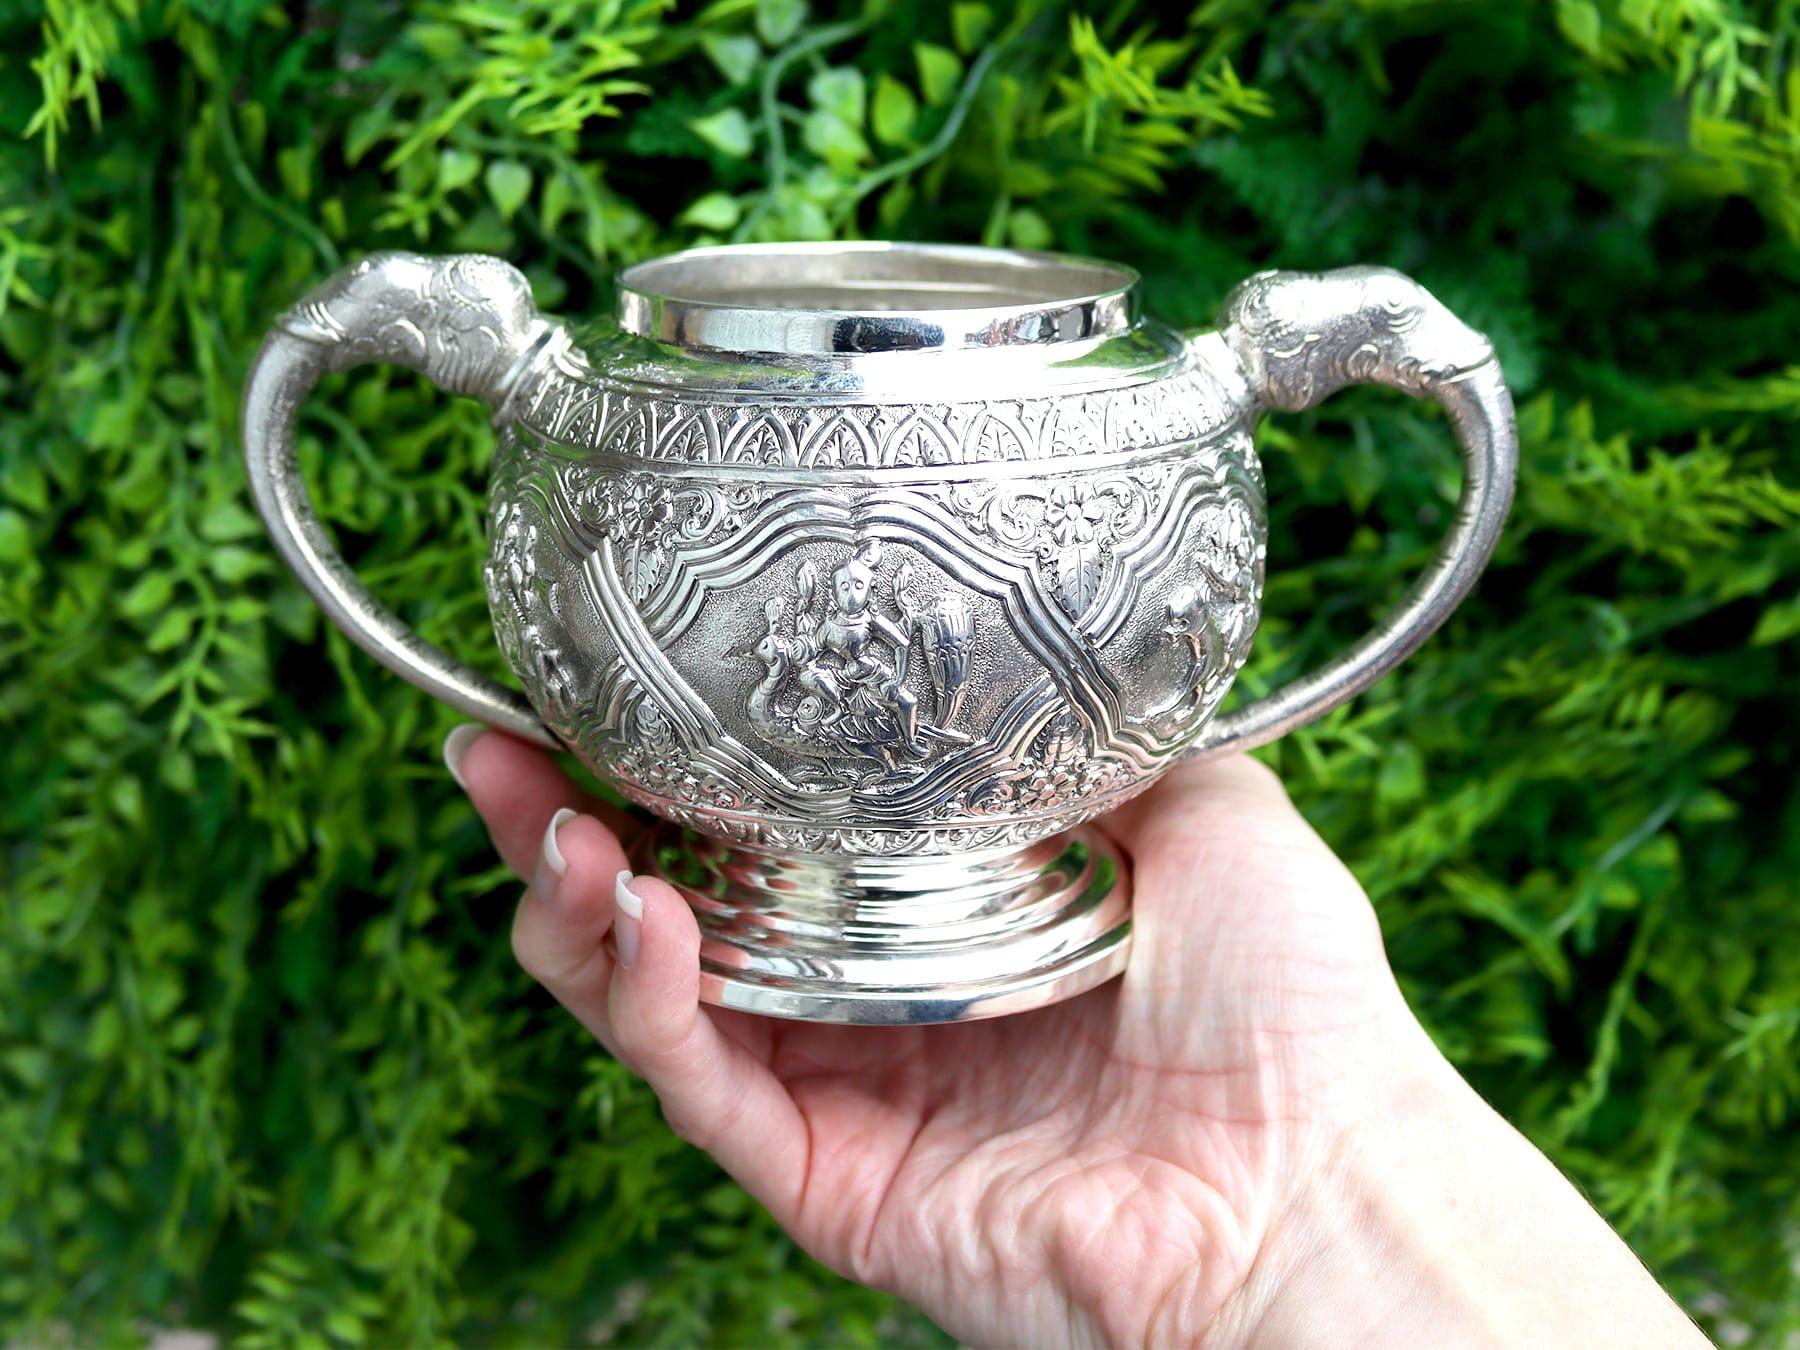 This exceptional antique Indian sterling silver sugar bowl has a circular form onto a spreading foot.

The body of this exceptional silver bowl is embellished with impressive chased leaf decoration, accented with a central broad interlacing band